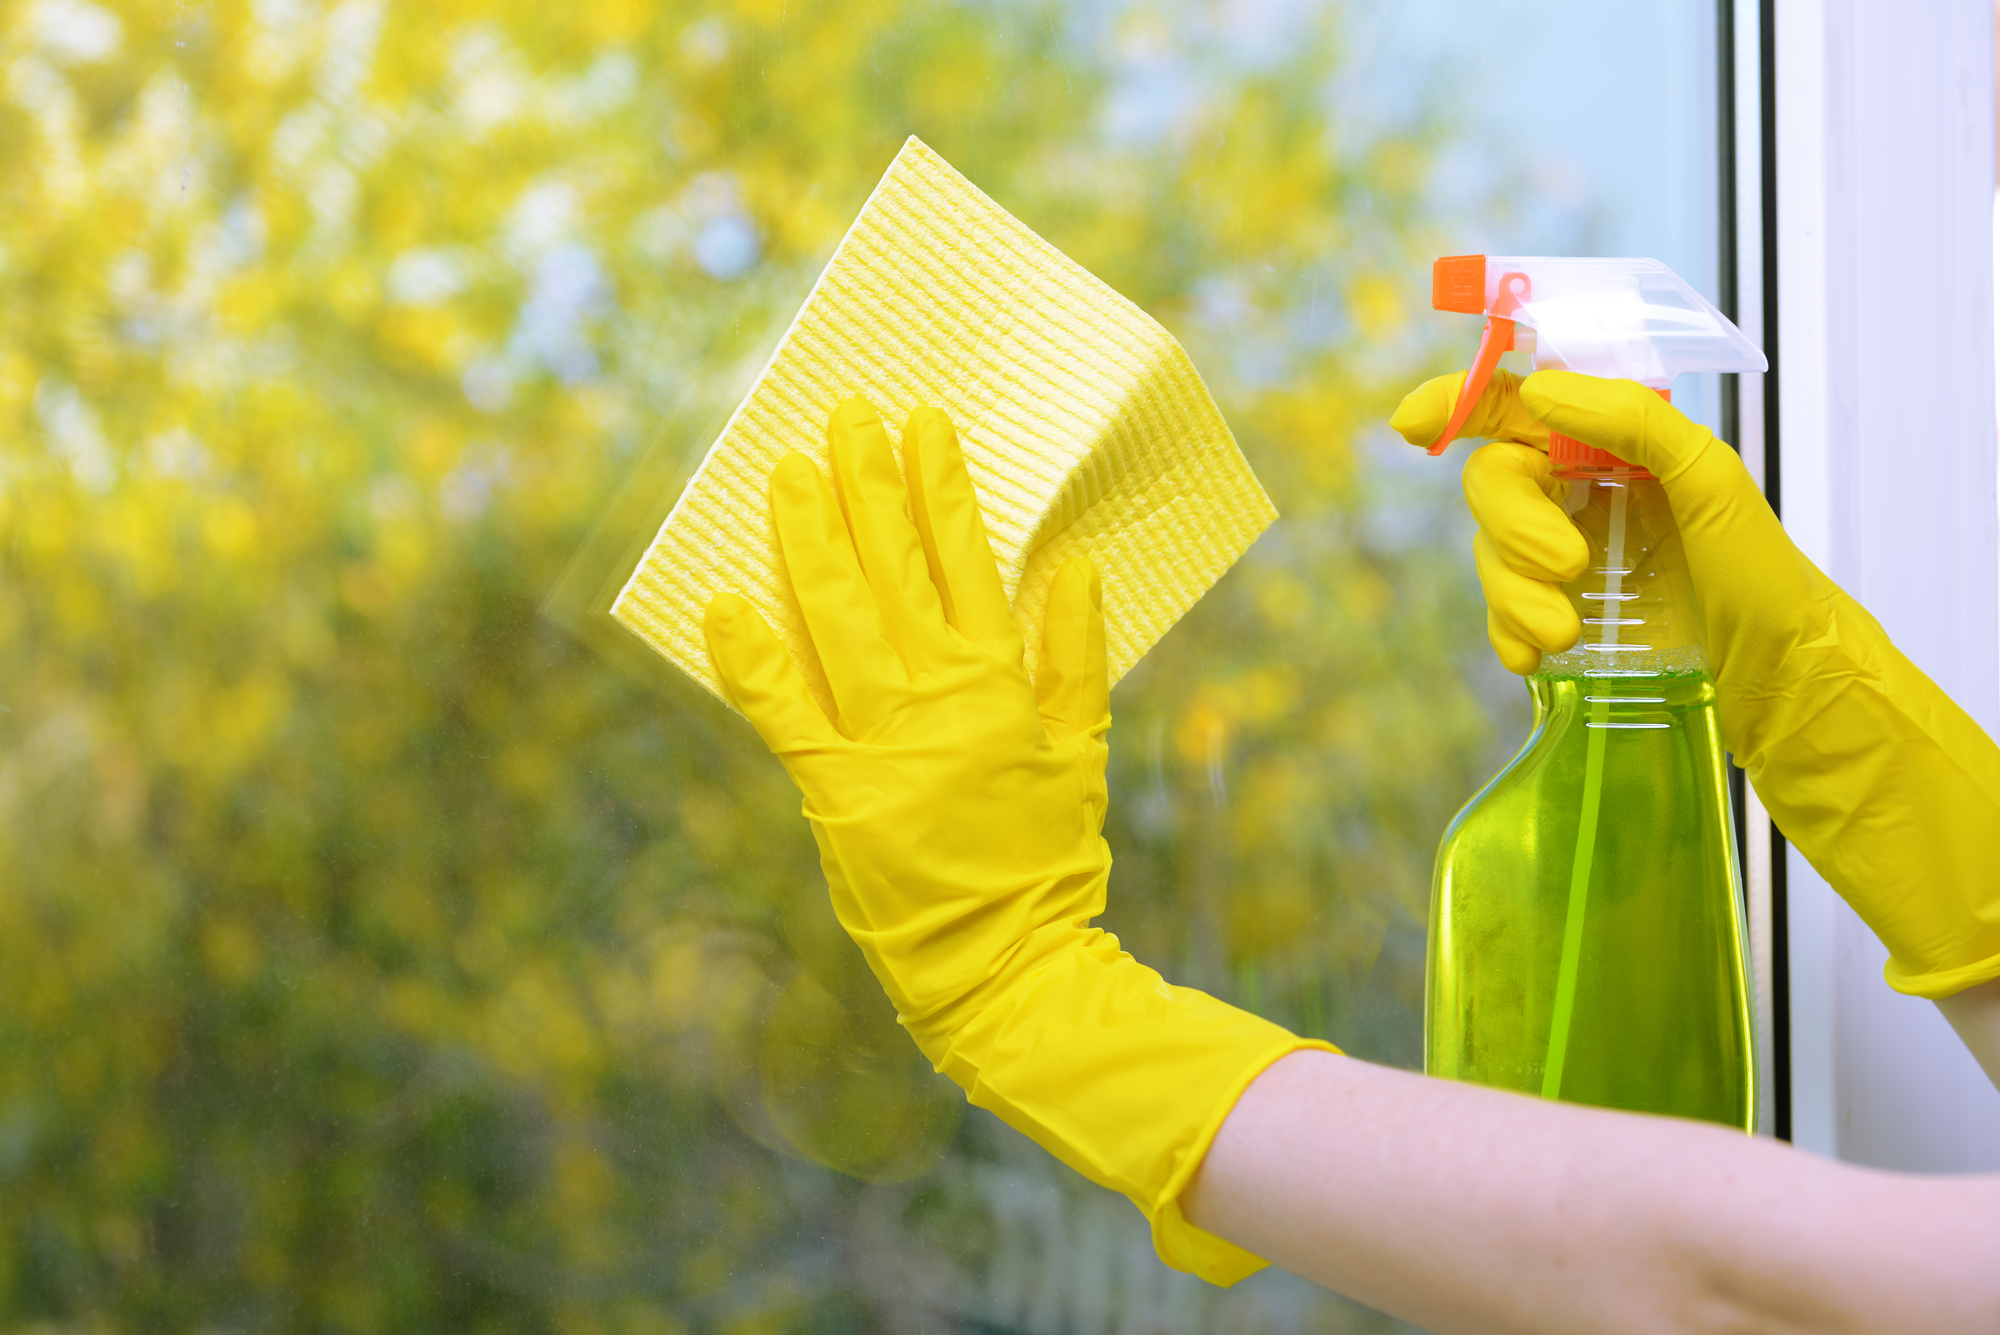 10 TIPS FOR FALL CLEANING